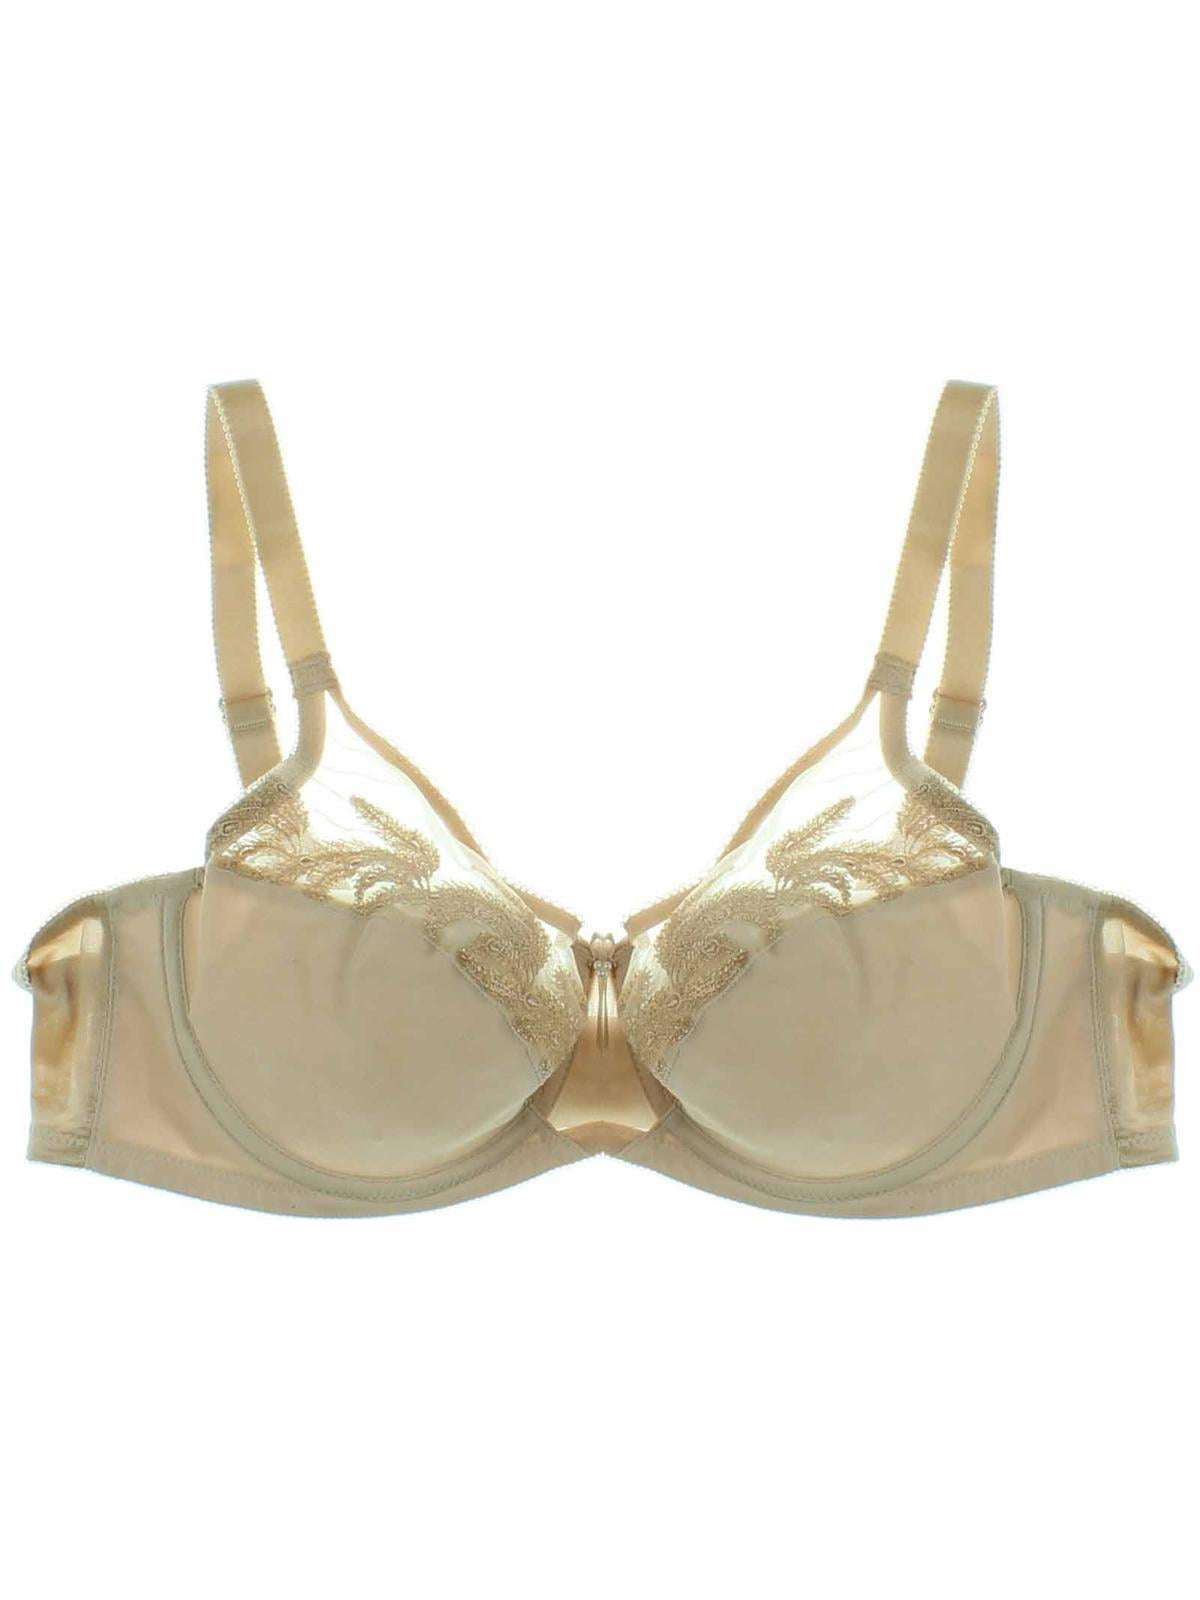 Women's Feather Embroidery Underwire Bra, Naturally Nude, 34C - Walmart.com